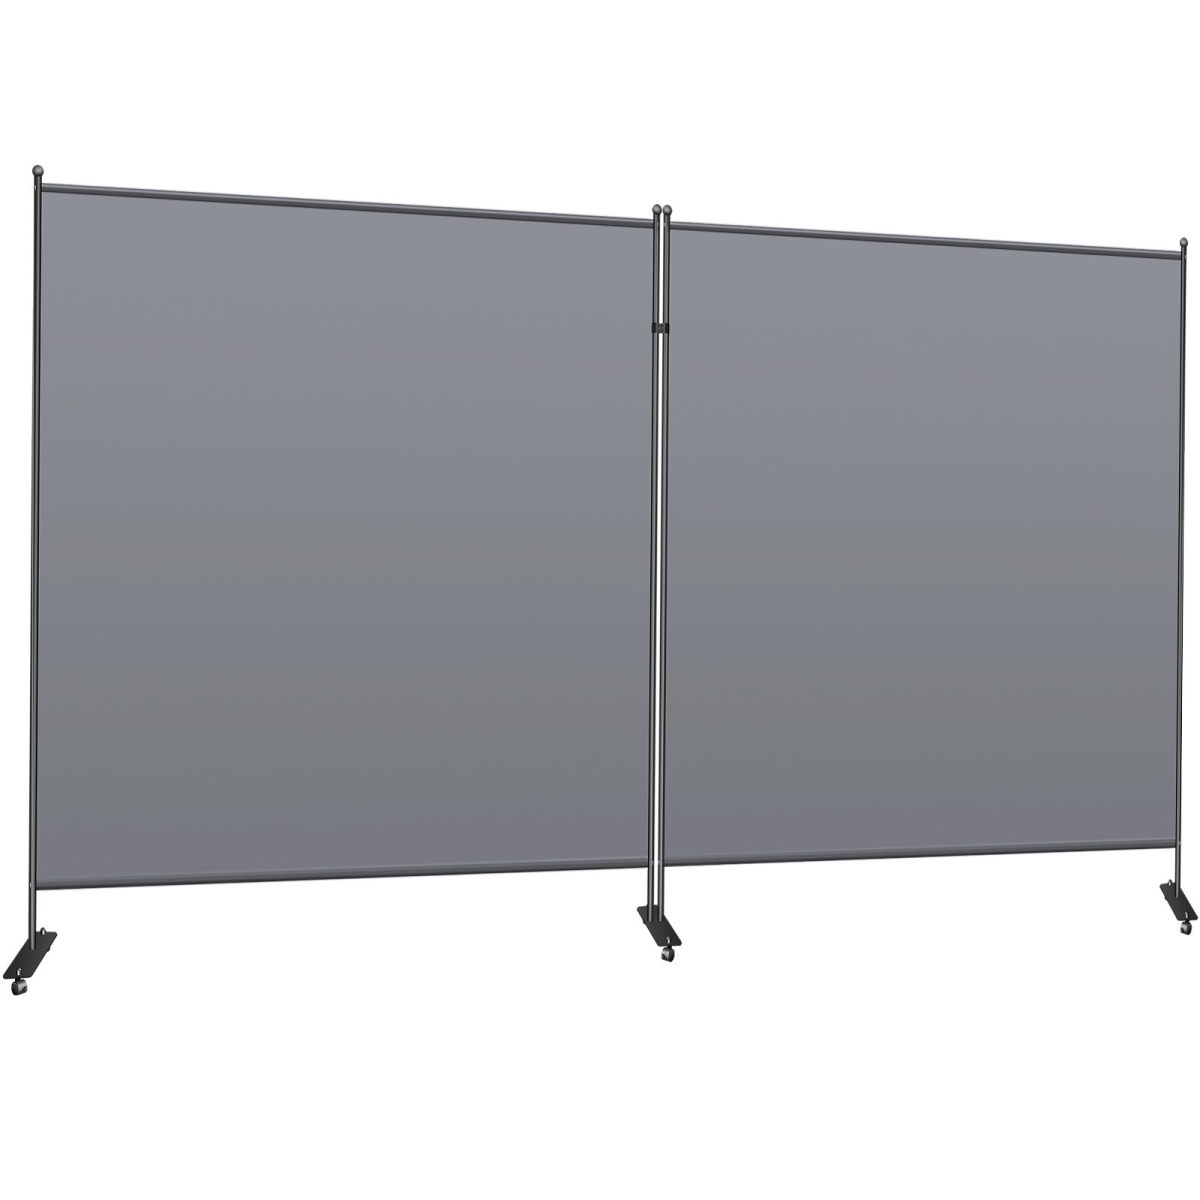 Picture of Vevor BGDPFHS142C72UQNPV0 Office Partition 142 x 14 x 72 in. Room Divider Wall 2-Panel Office Divider Folding Portable Office Walls Dividers